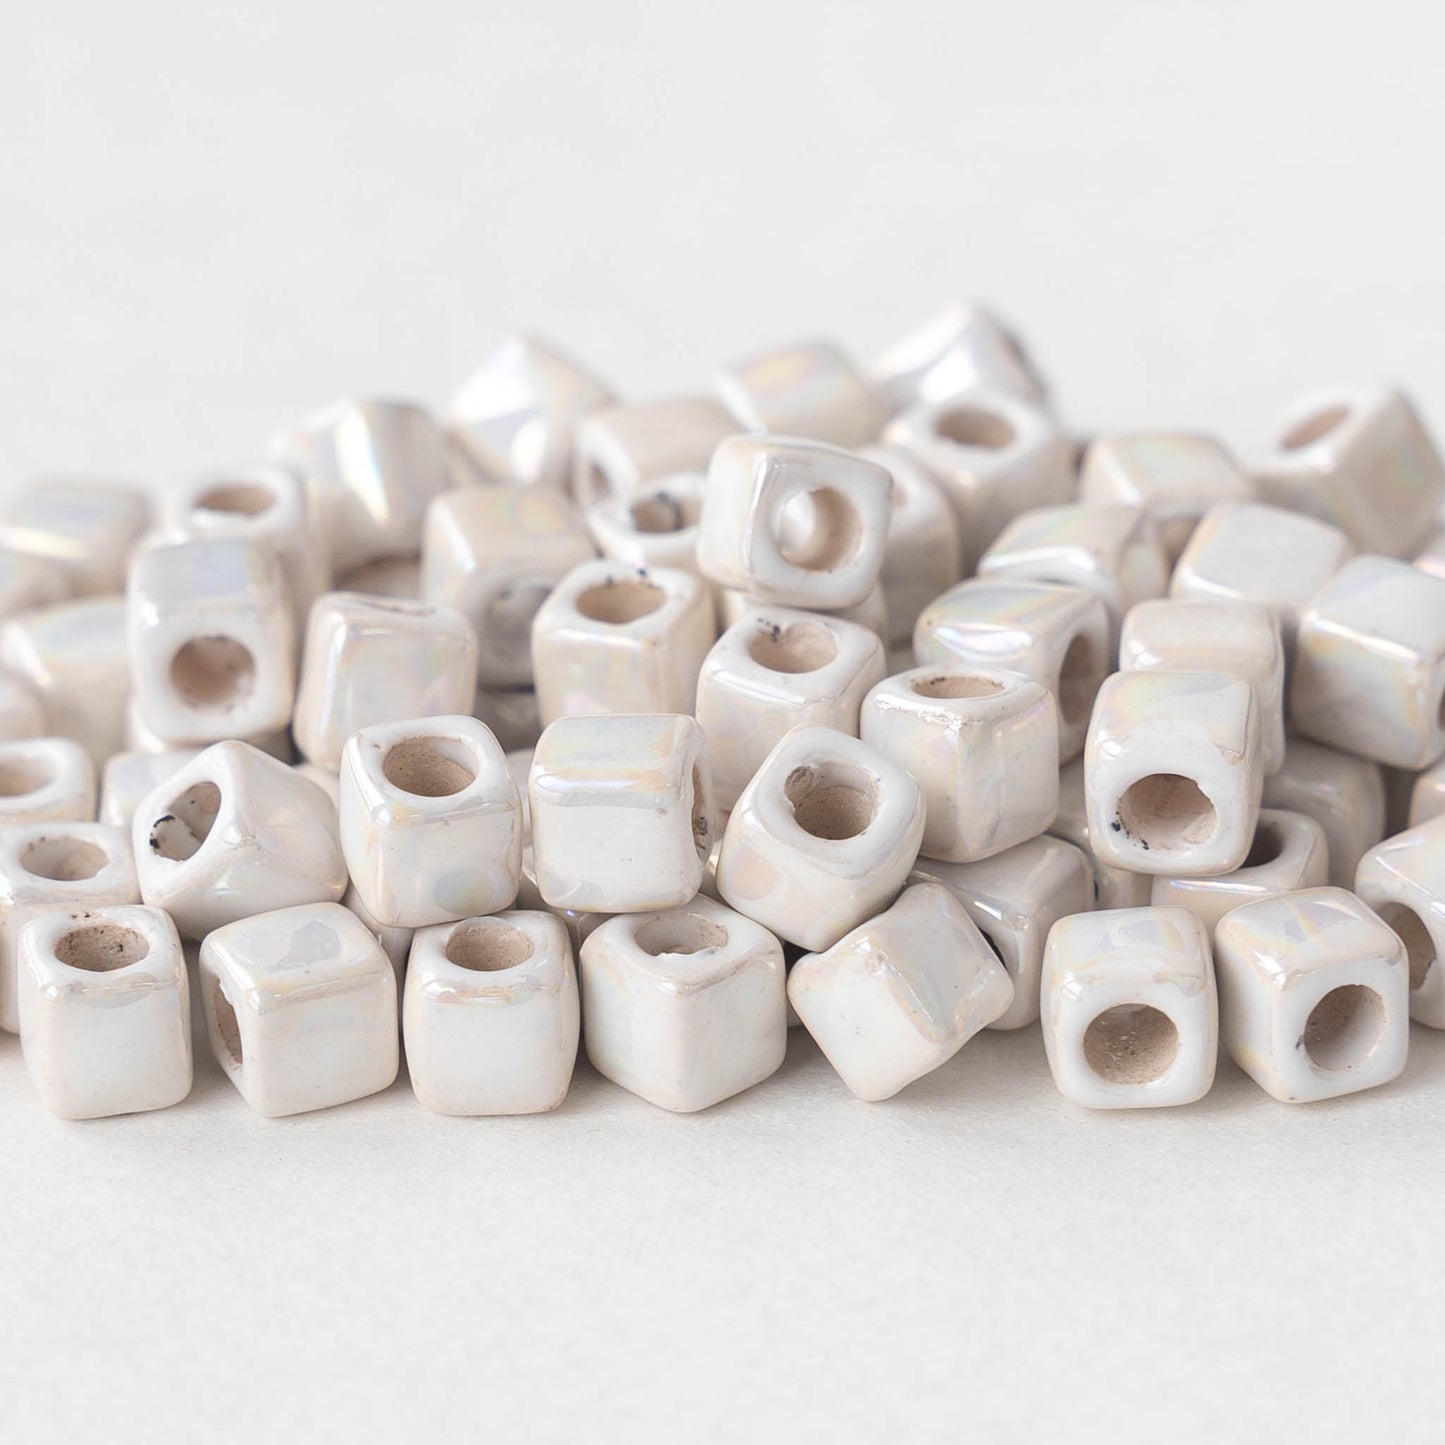 5.5mm Ceramic Cube Beads - Iridescent Ivory Opal Luster - 10 or 30 beads